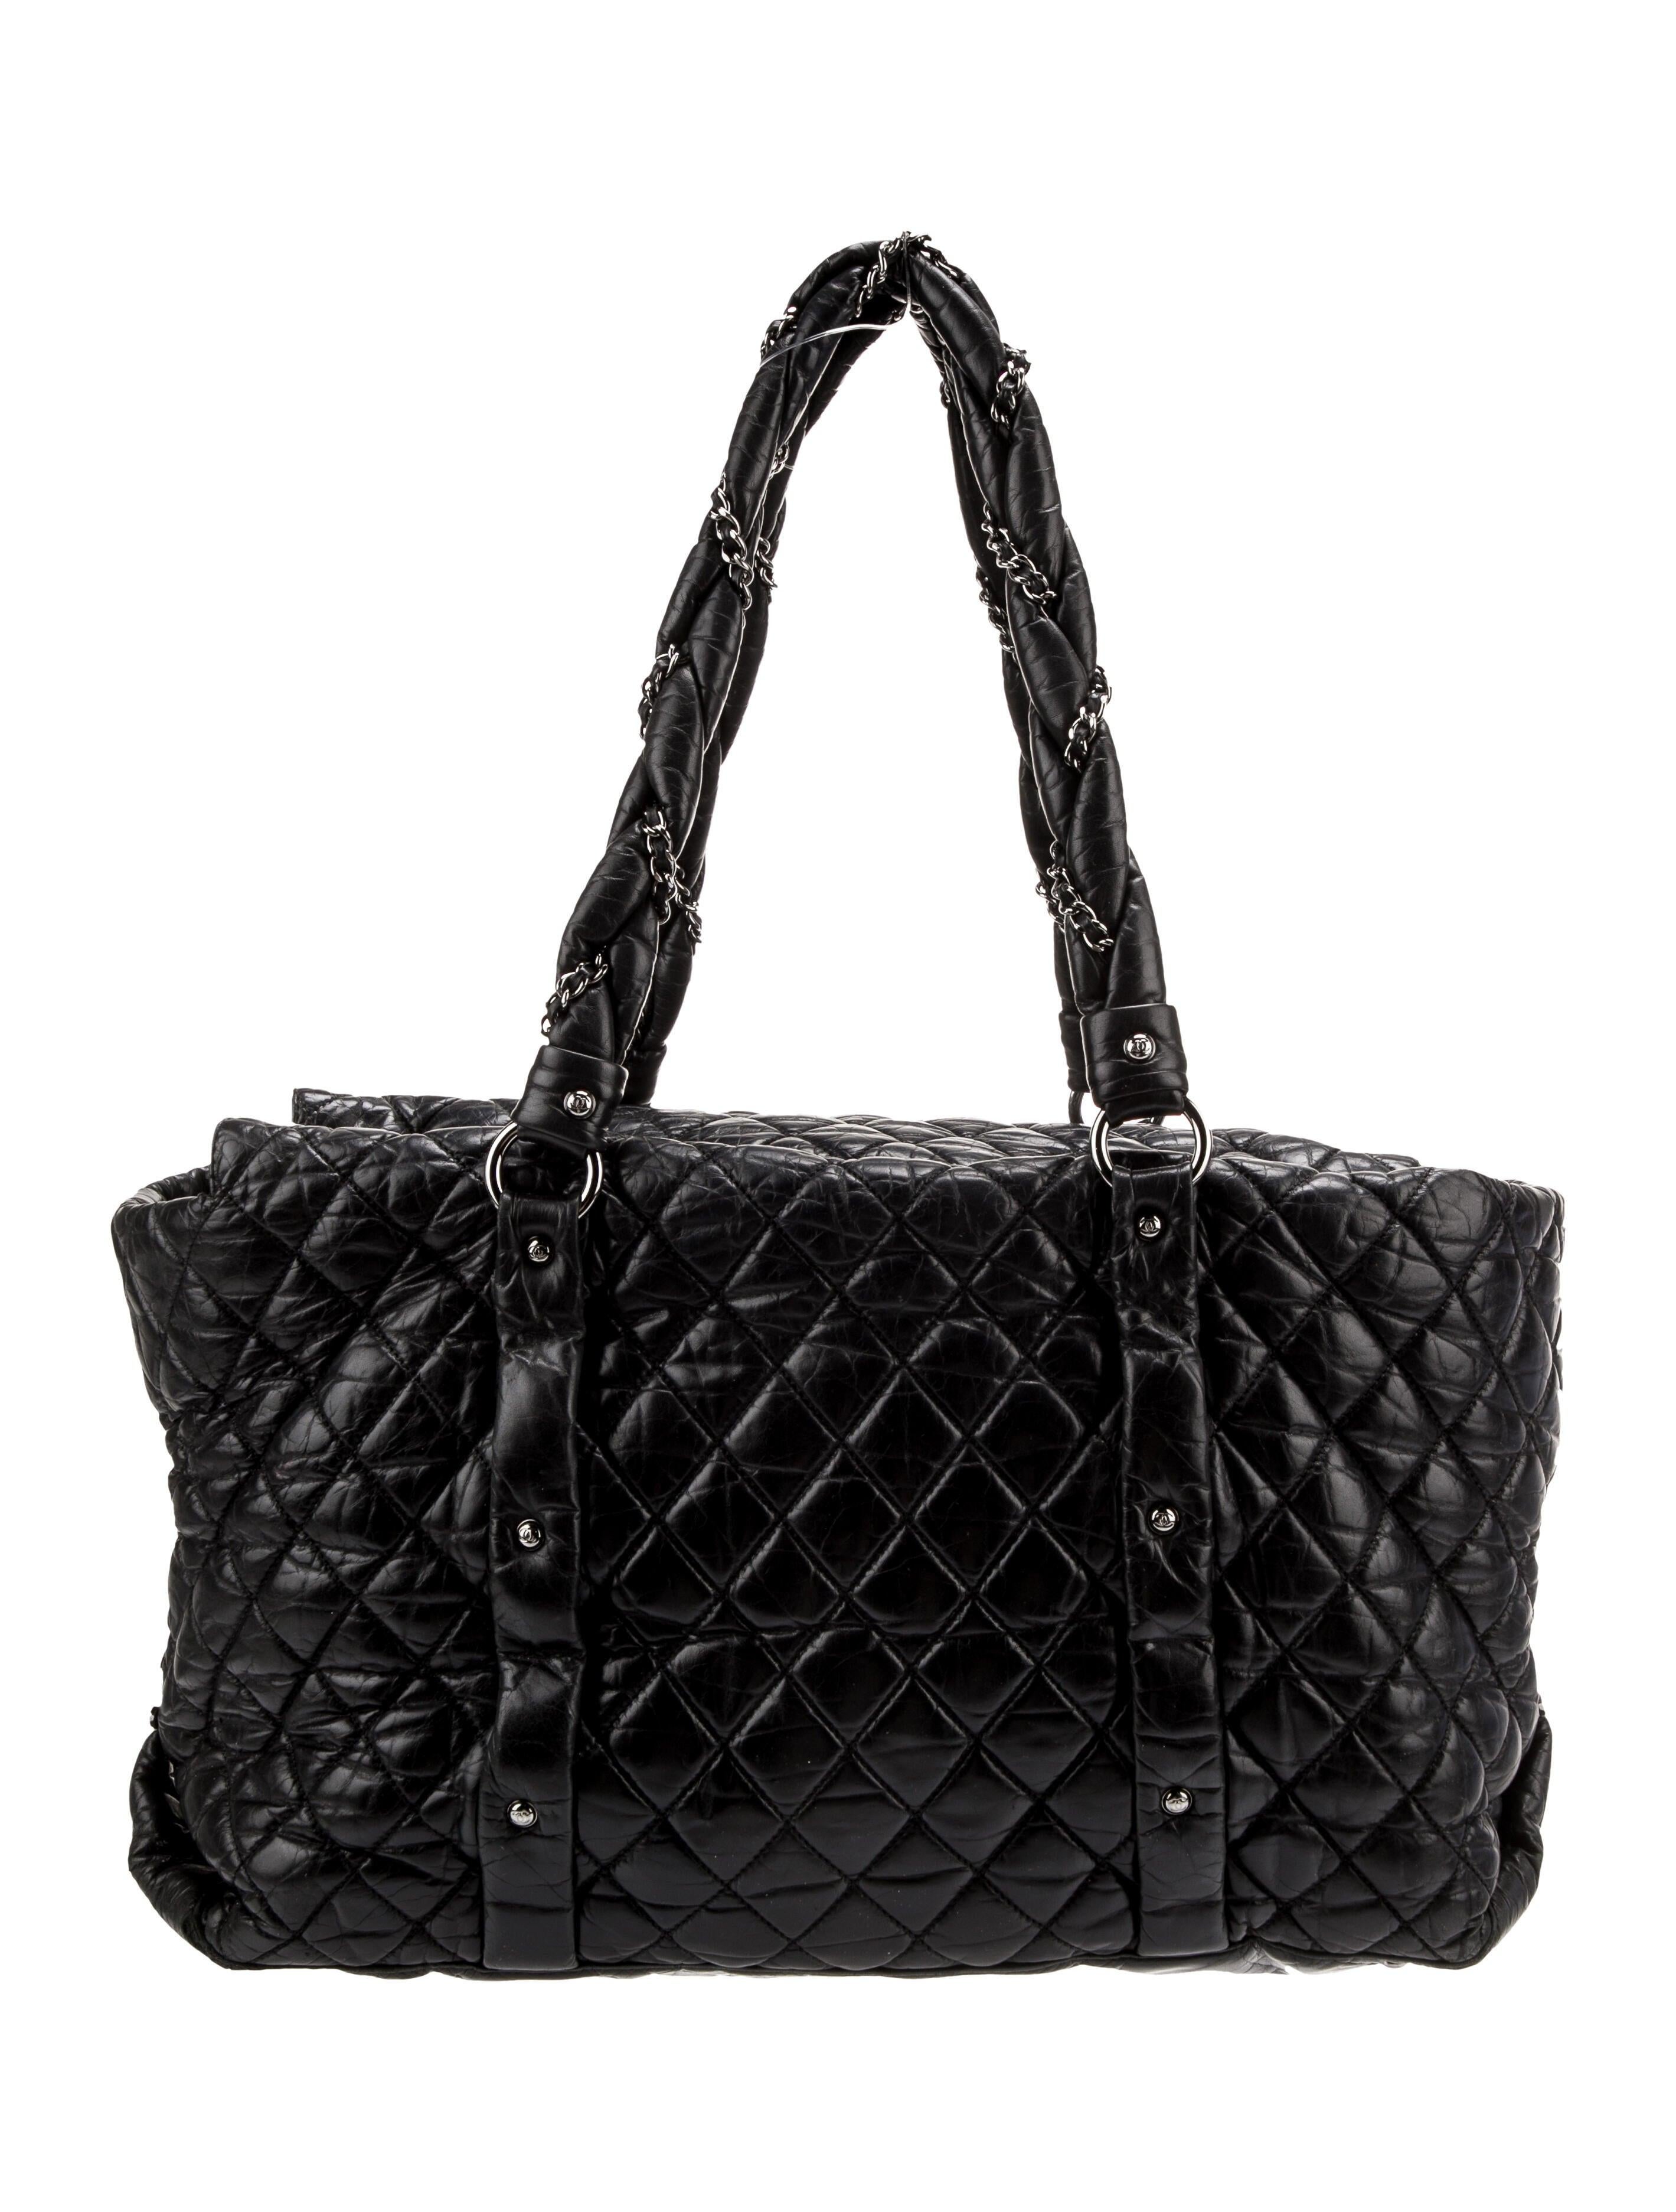 Chanel 2006 Soft Plush Quilted Distressed Leather Large Carry-On Travel Tote Bag For Sale 7